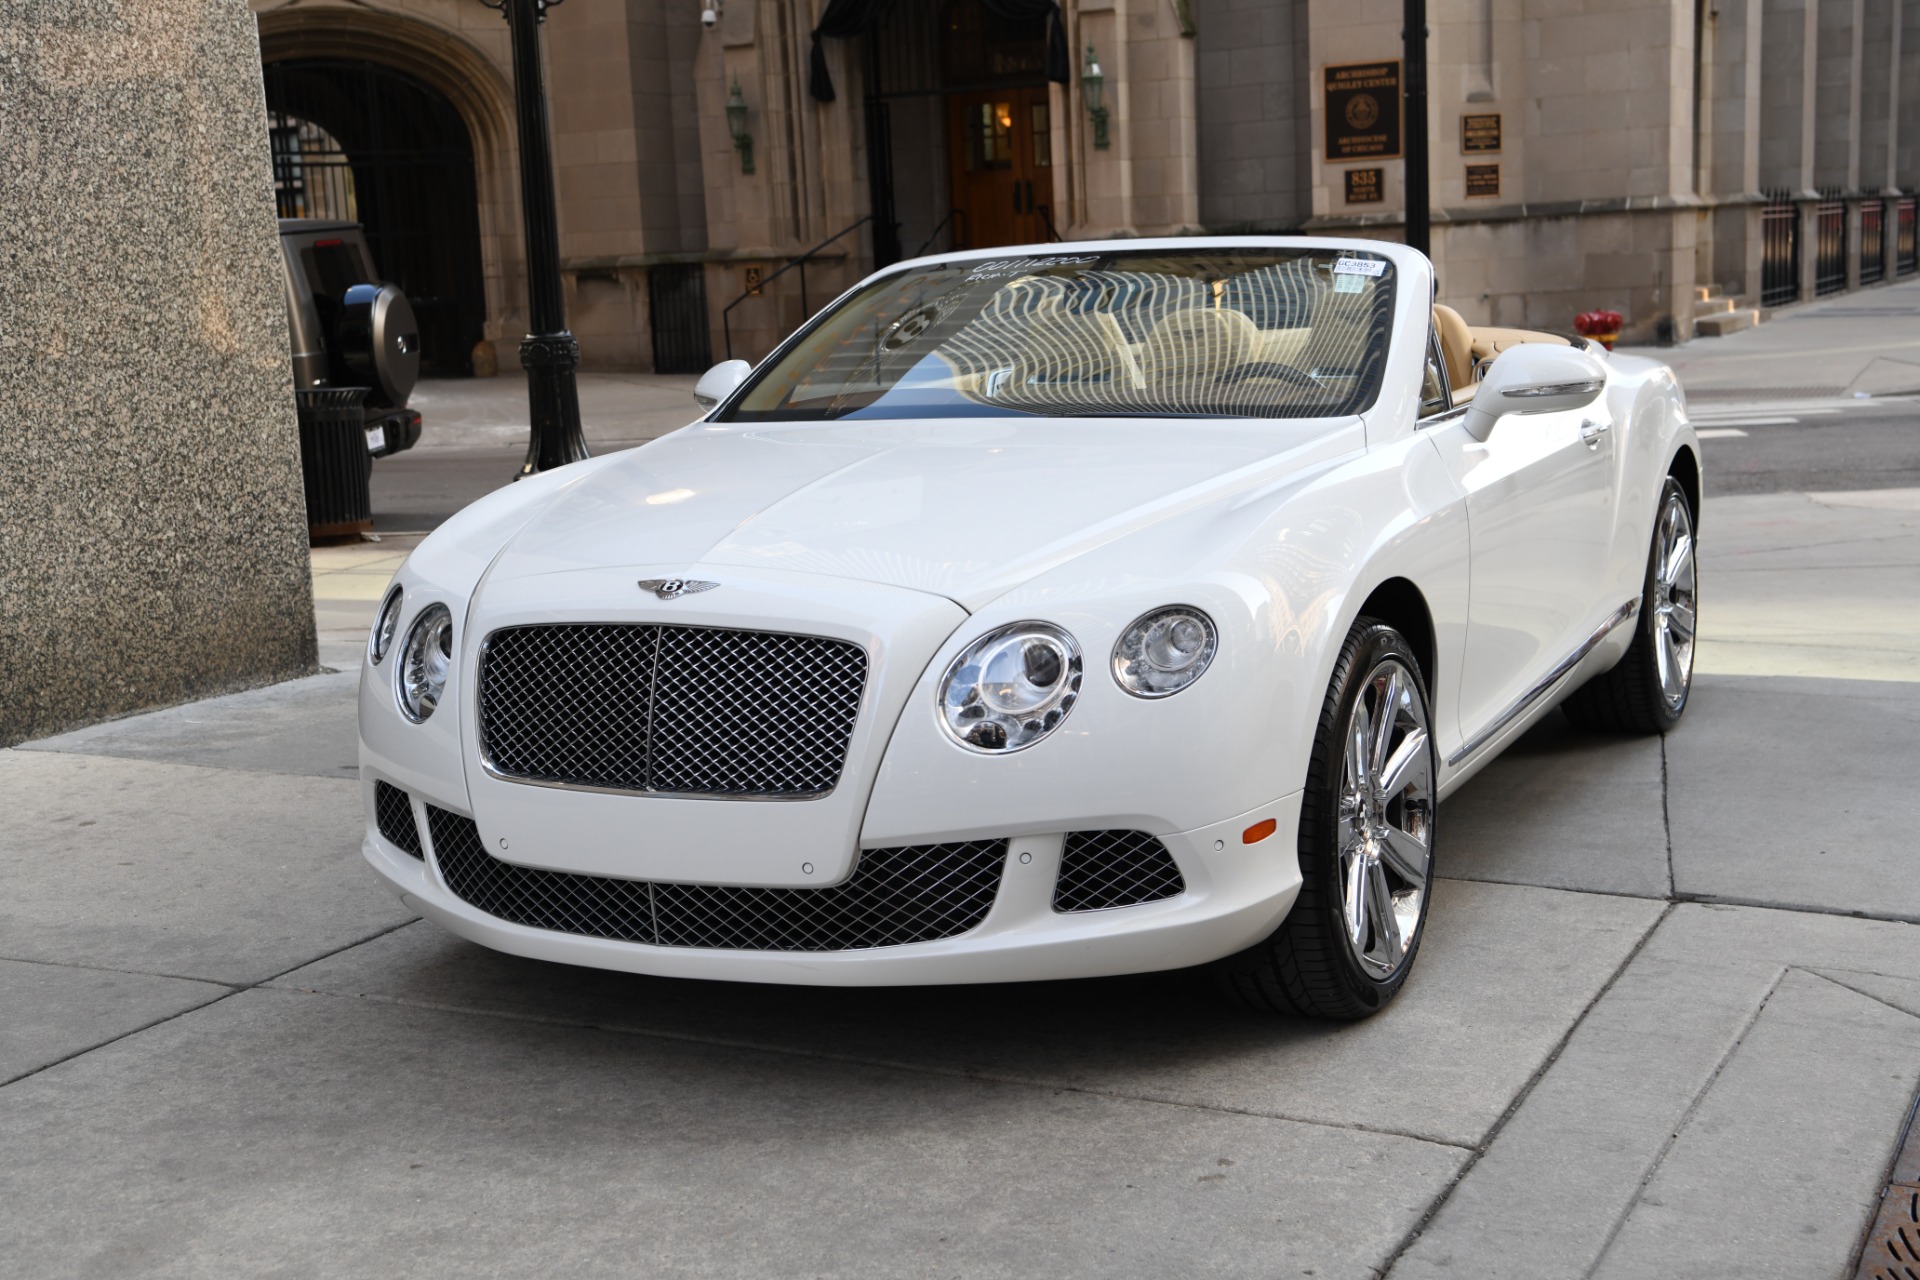 Pre-Owned 2012 Bentley Continental GTC Convertible GTC Convertible in  Chicago #GC3853 | Maserati of Chicago